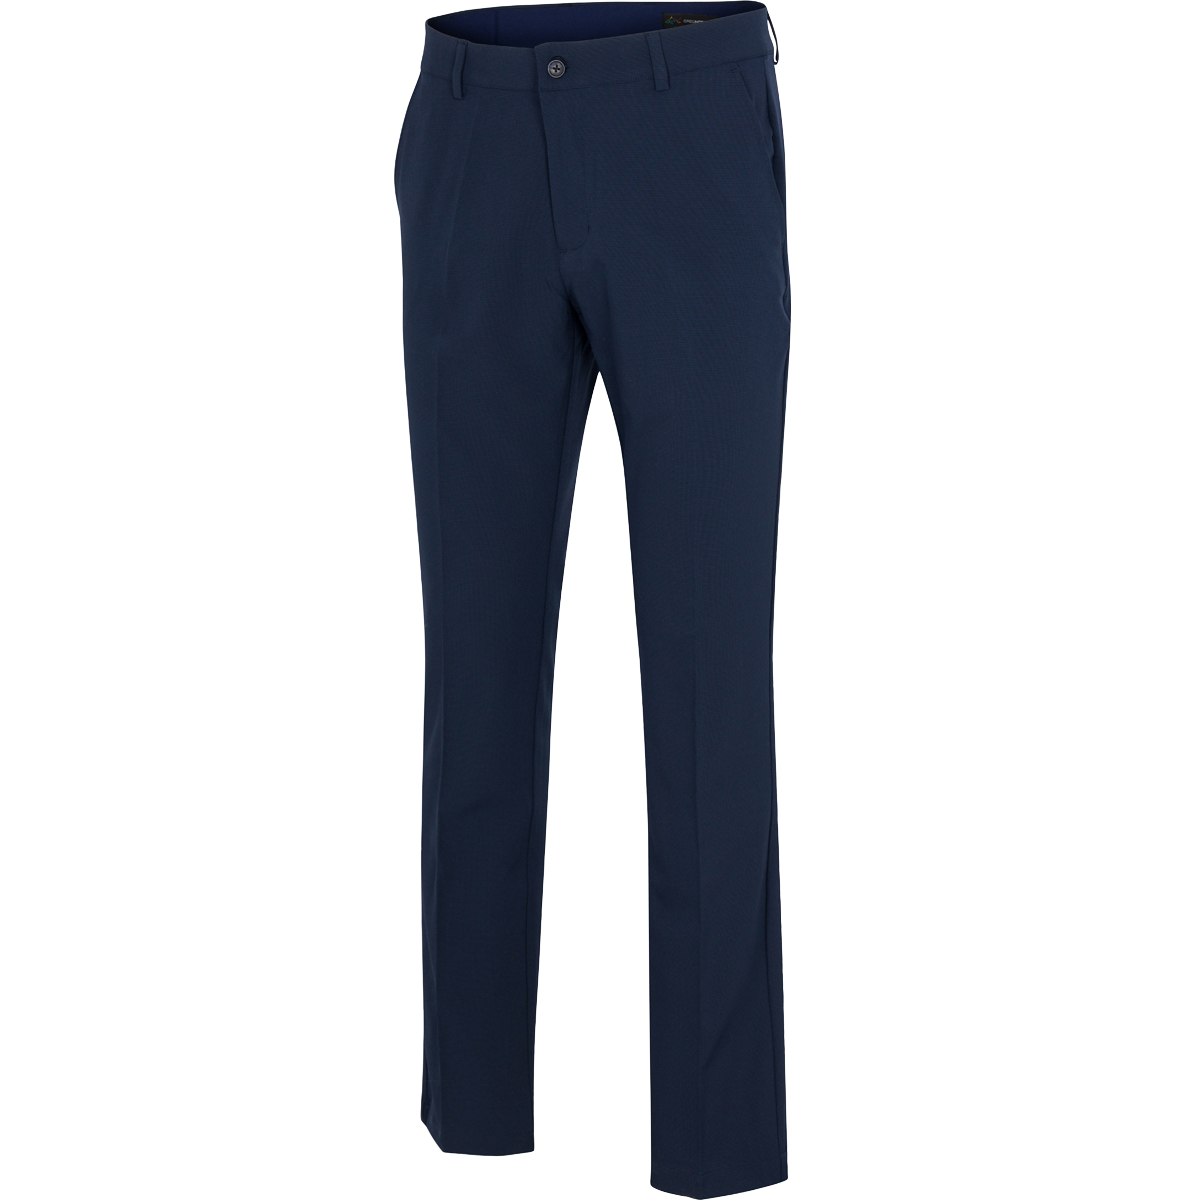 Greg Norman Women's Essential Pull-On Stretch Pants - Worldwide